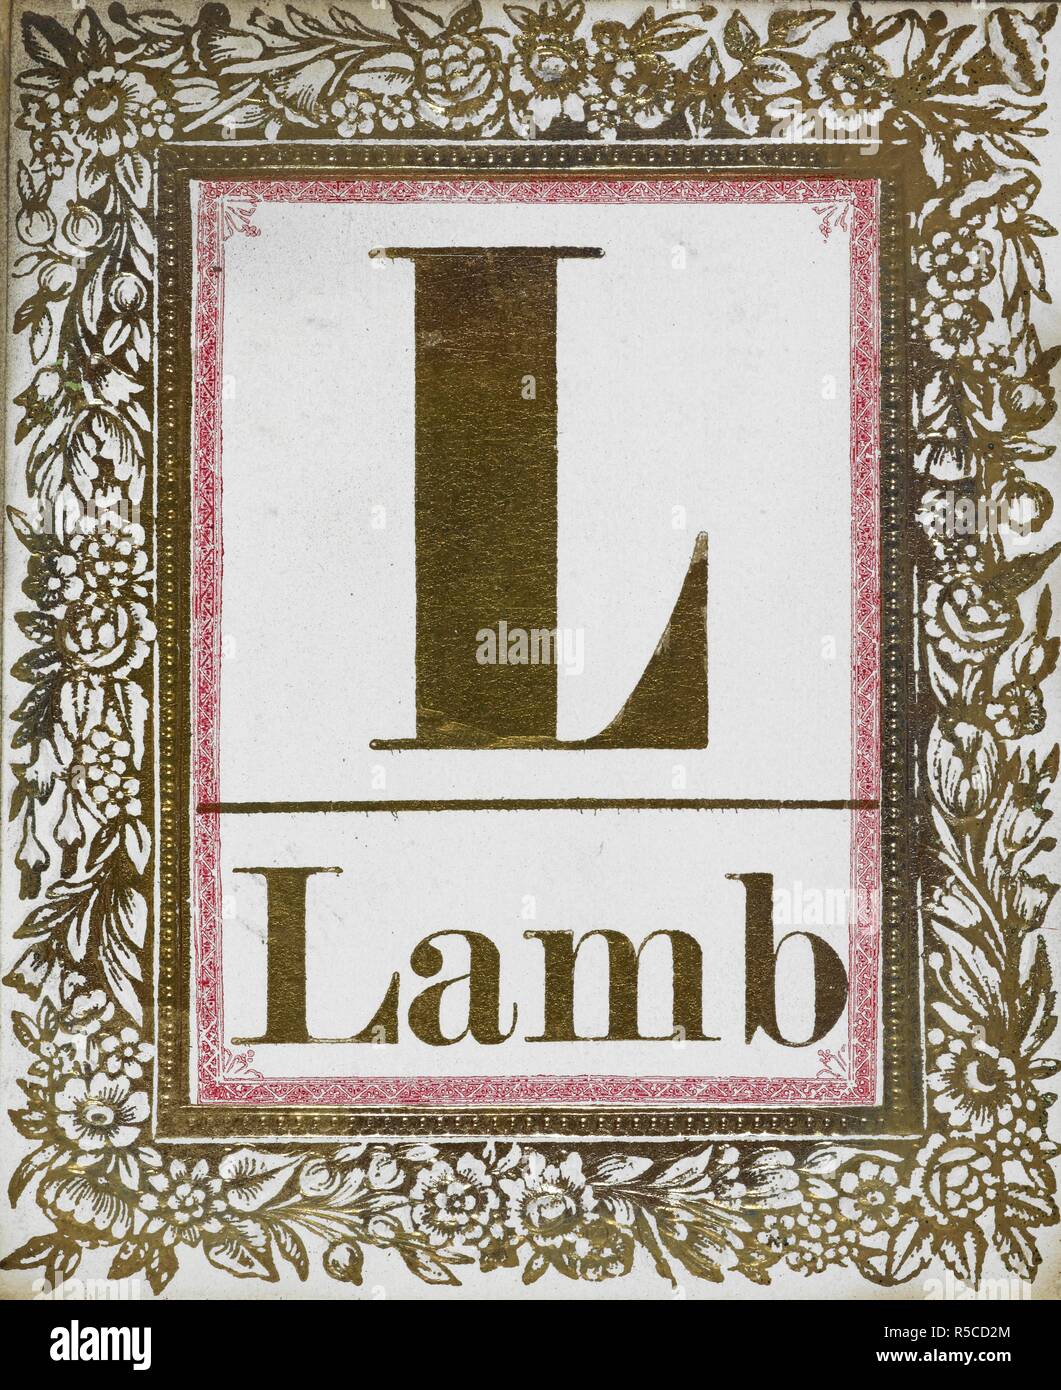 Letter L: Lamb. Gold letter with decorative border. Alphabet Cards. London : T. Nelson & Sons, [1858]. Instructions accompanying cards: 'Let the letters all be piled in a confused heap, from which the child may lift them one by one. Let him keep all he can name correctly, and let the teacher take all which he names wrong, till the pile of letters is divided in two heaps, which may be counted. If the child's heap is the largest, that is, if he has named the greatest number right, he has gained the game. If the prize is a sugar-plum or any trifle, it will excite great interest; the child will so Stock Photo